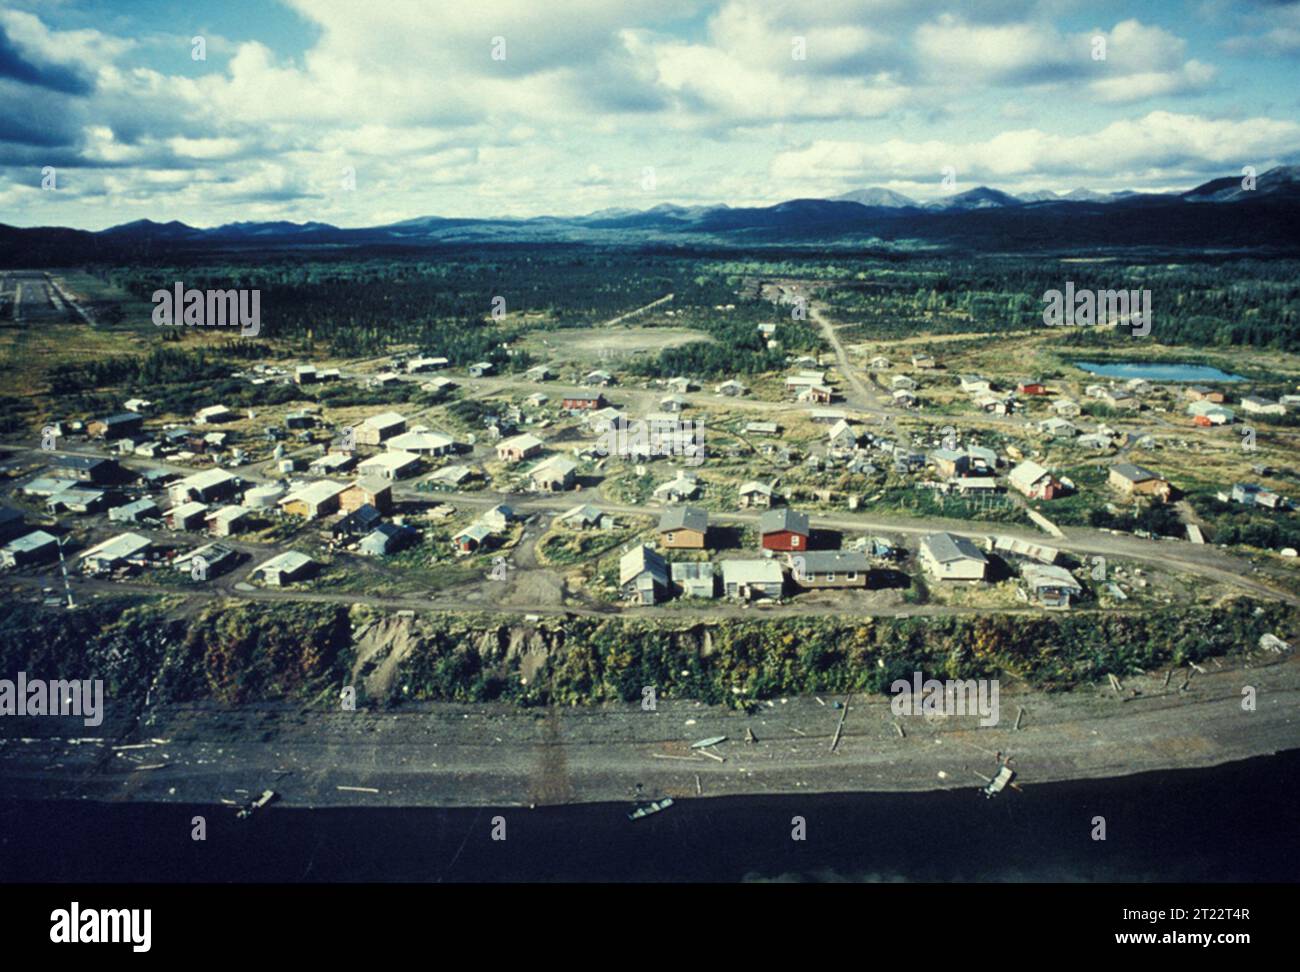 Aerial view of the village of Kaltag and the Yukon River. Kaltag is located near the Innoko National Wildlife Refuge. This village is a checkpoint for the Iditarod Trail Race. Subjects: Villages; Villagess; Aerial photography photography; Rivers and streams; Yukon River; Alaska.  . 1998 - 2011. Stock Photo